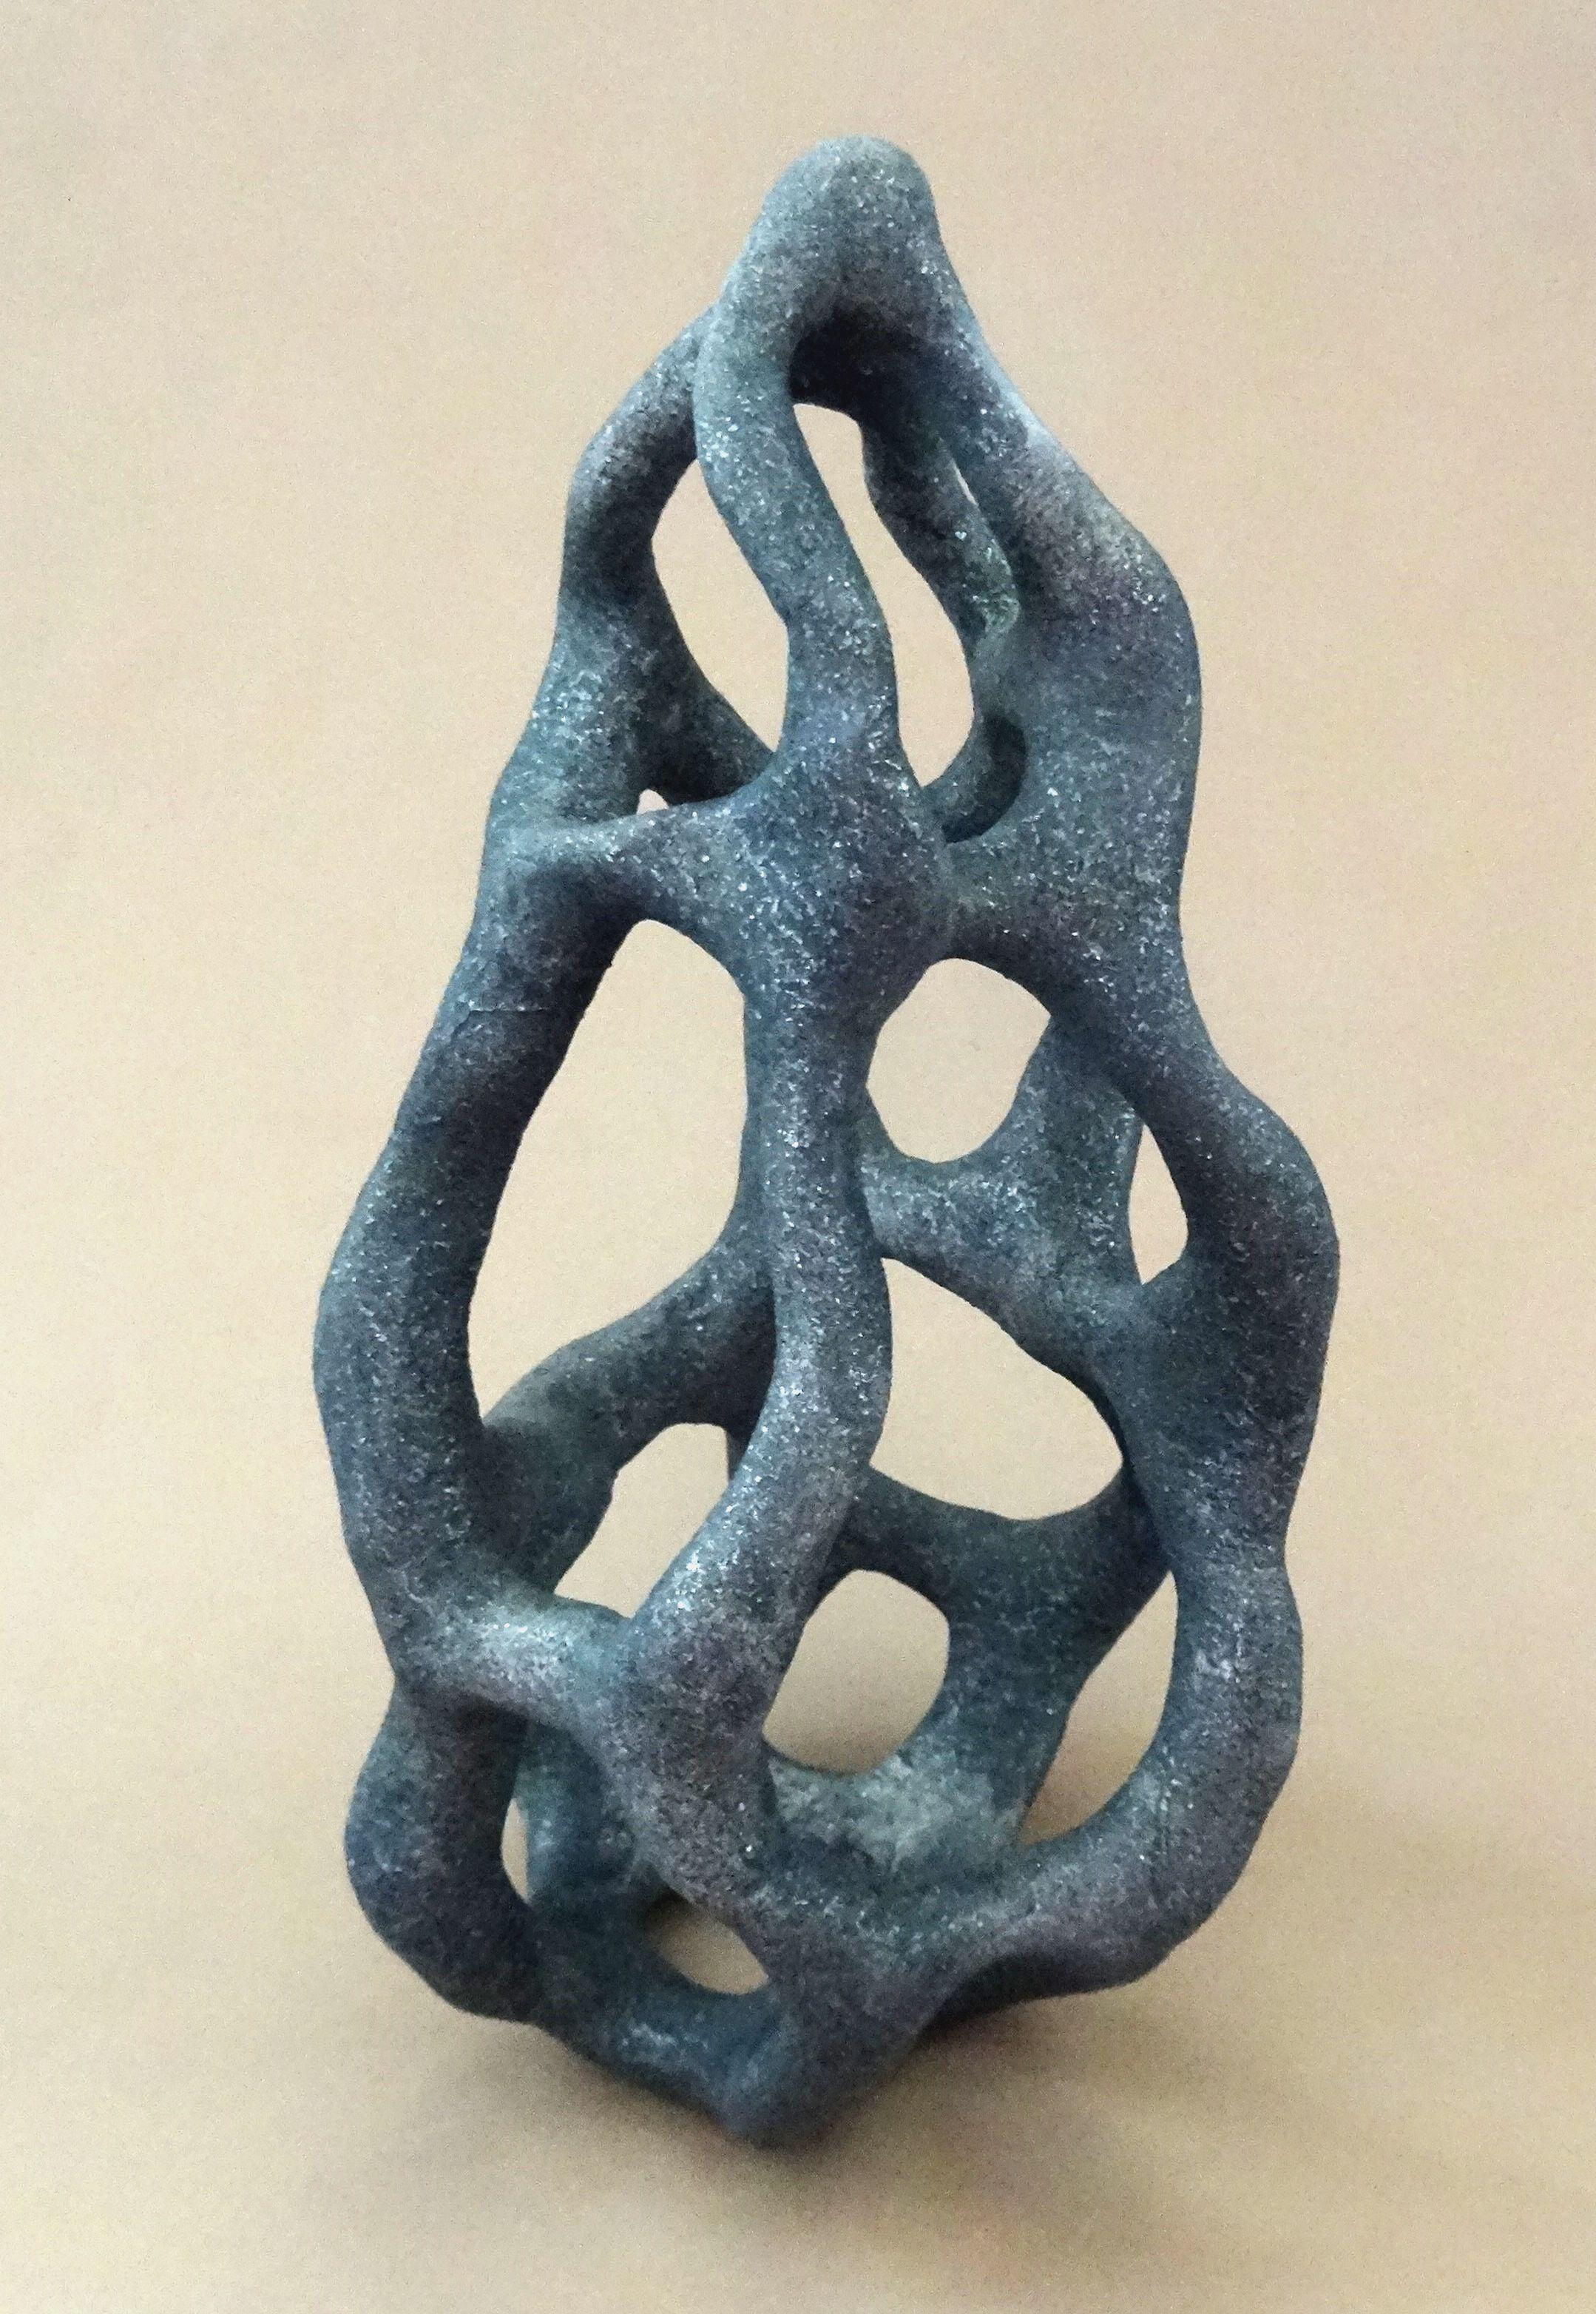 Elina Titane  Abstract Sculpture - Infinity loops. Stone mass h 21 cm; w 11 cm; d 11 cm